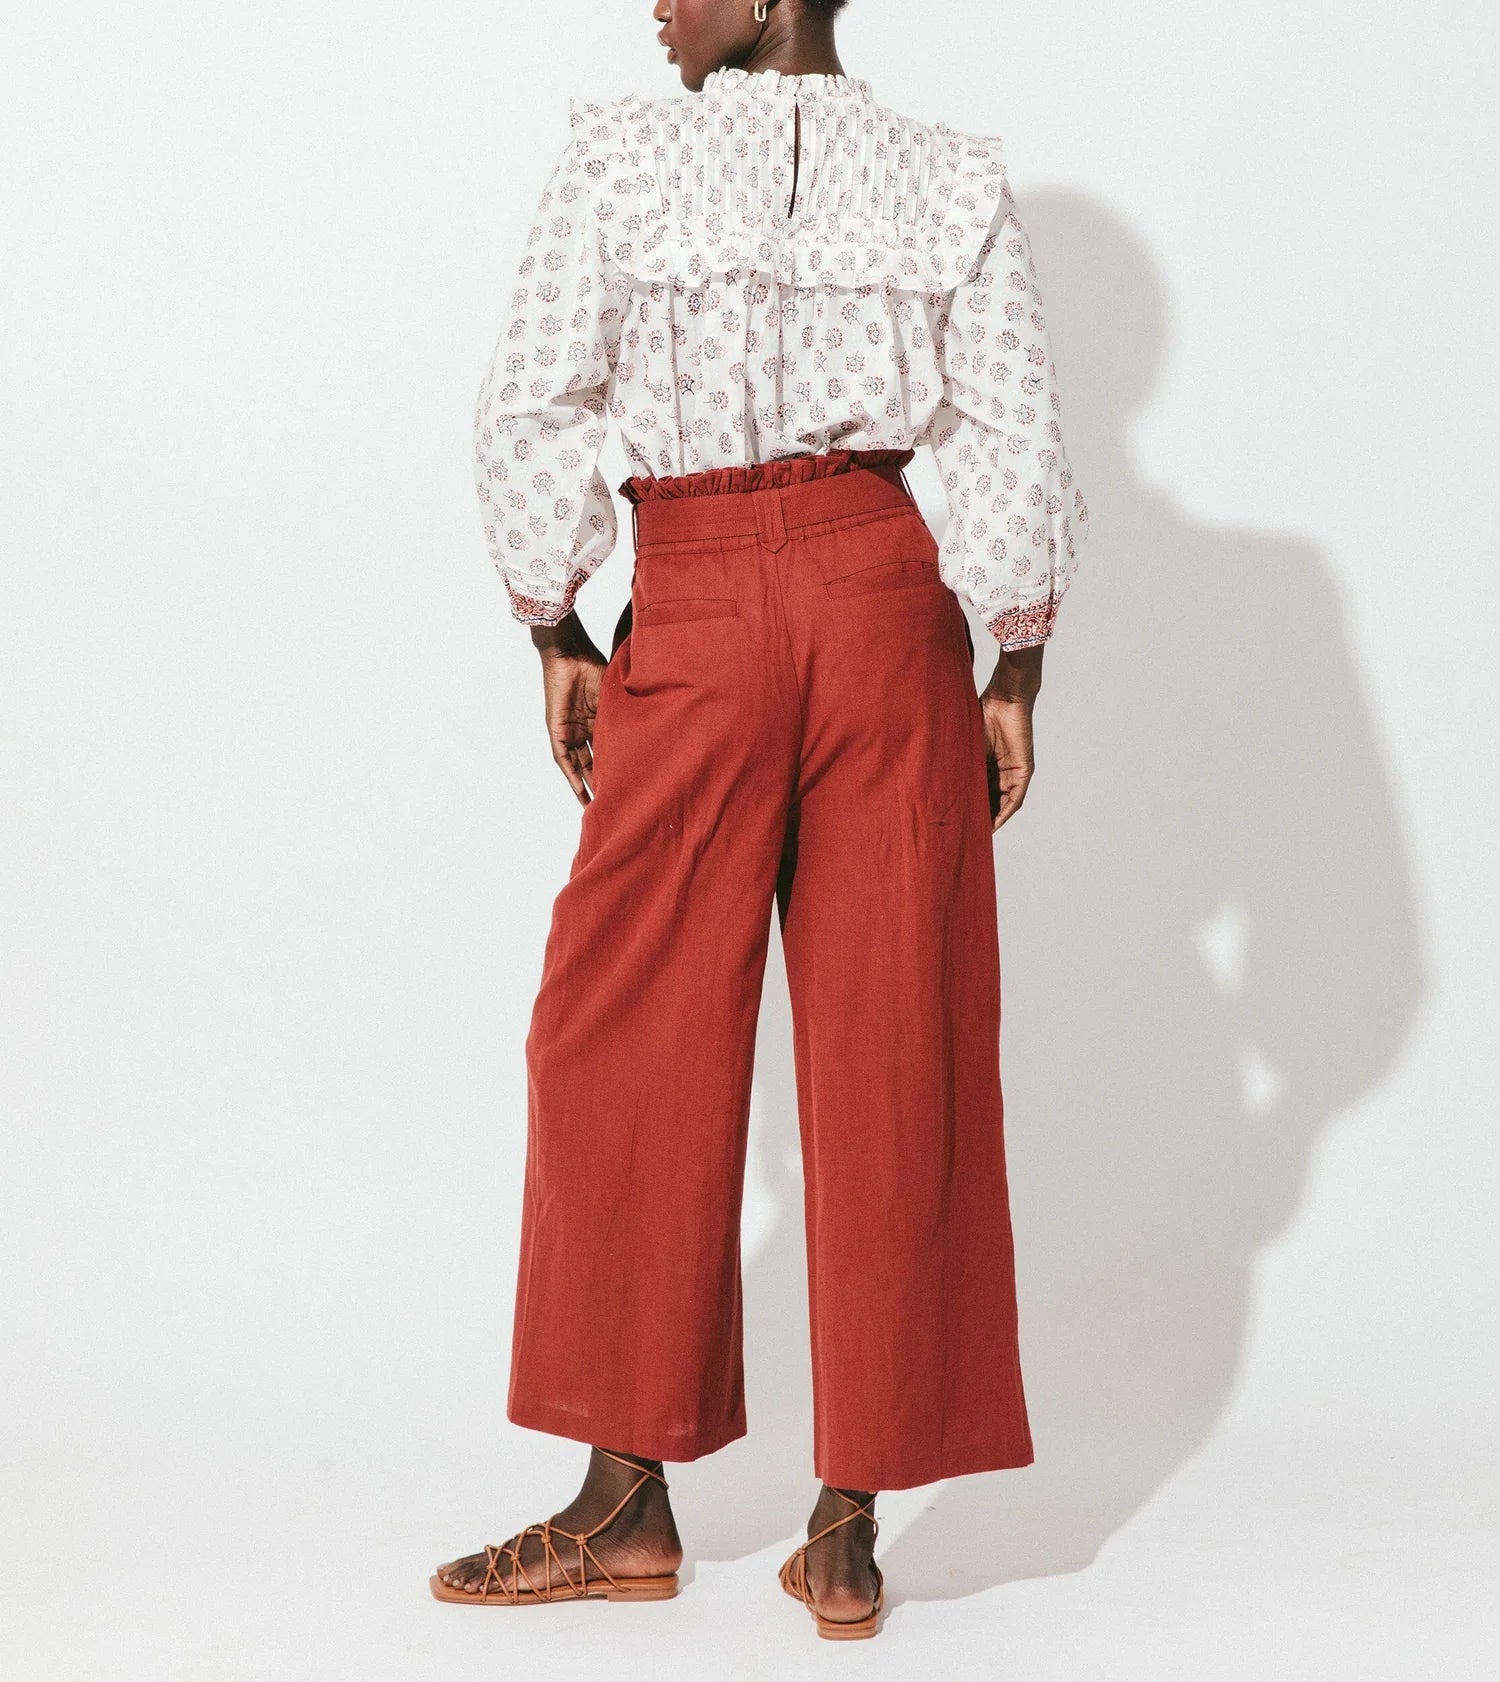 Althea Pant in Vintage Rust